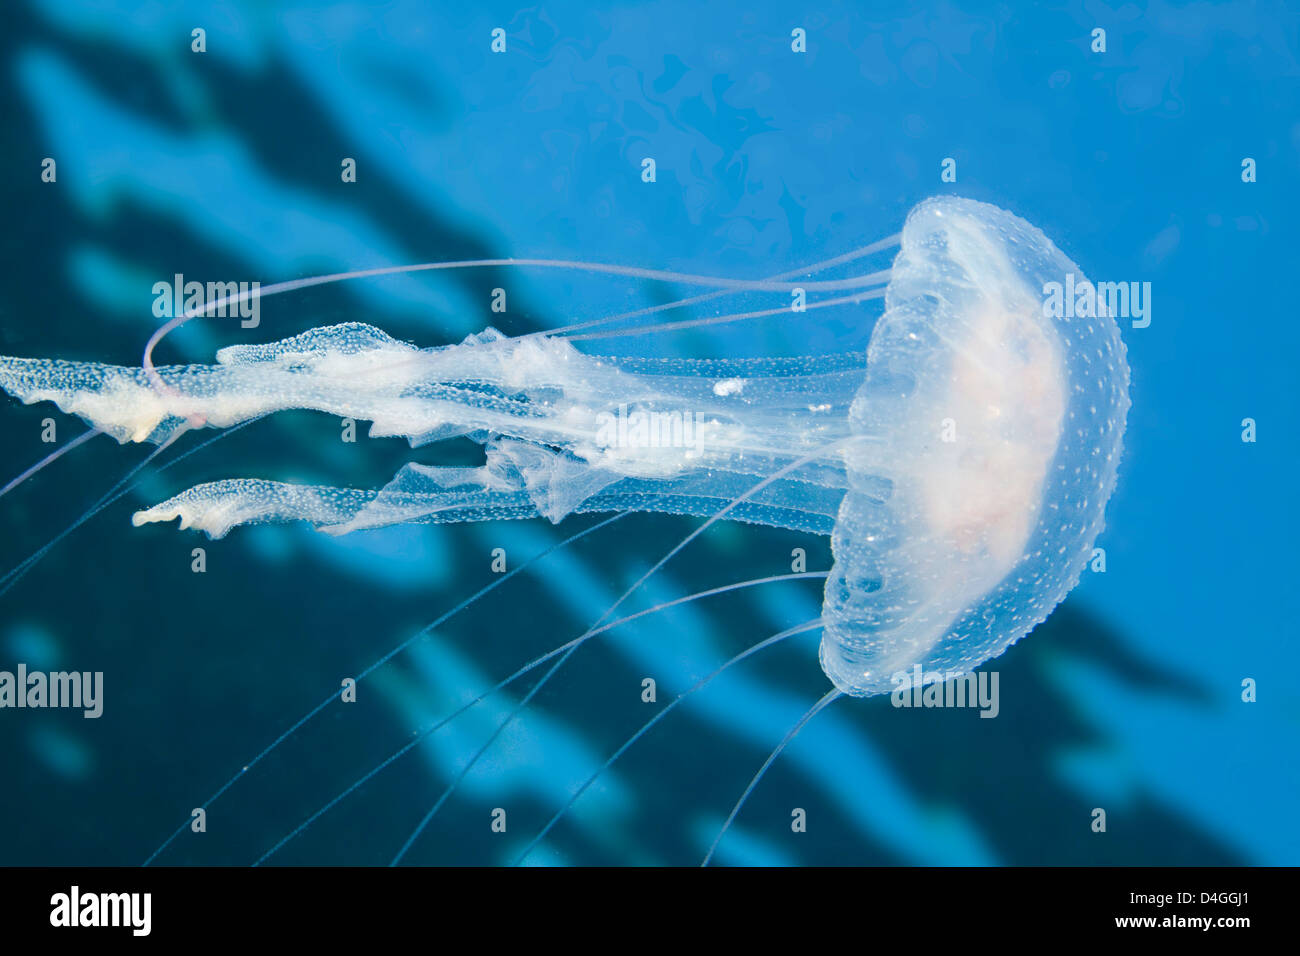 Thousands of these luminescent jellyfish, Pelagia noctiluca, filled the water column in the Philippines. Stock Photo